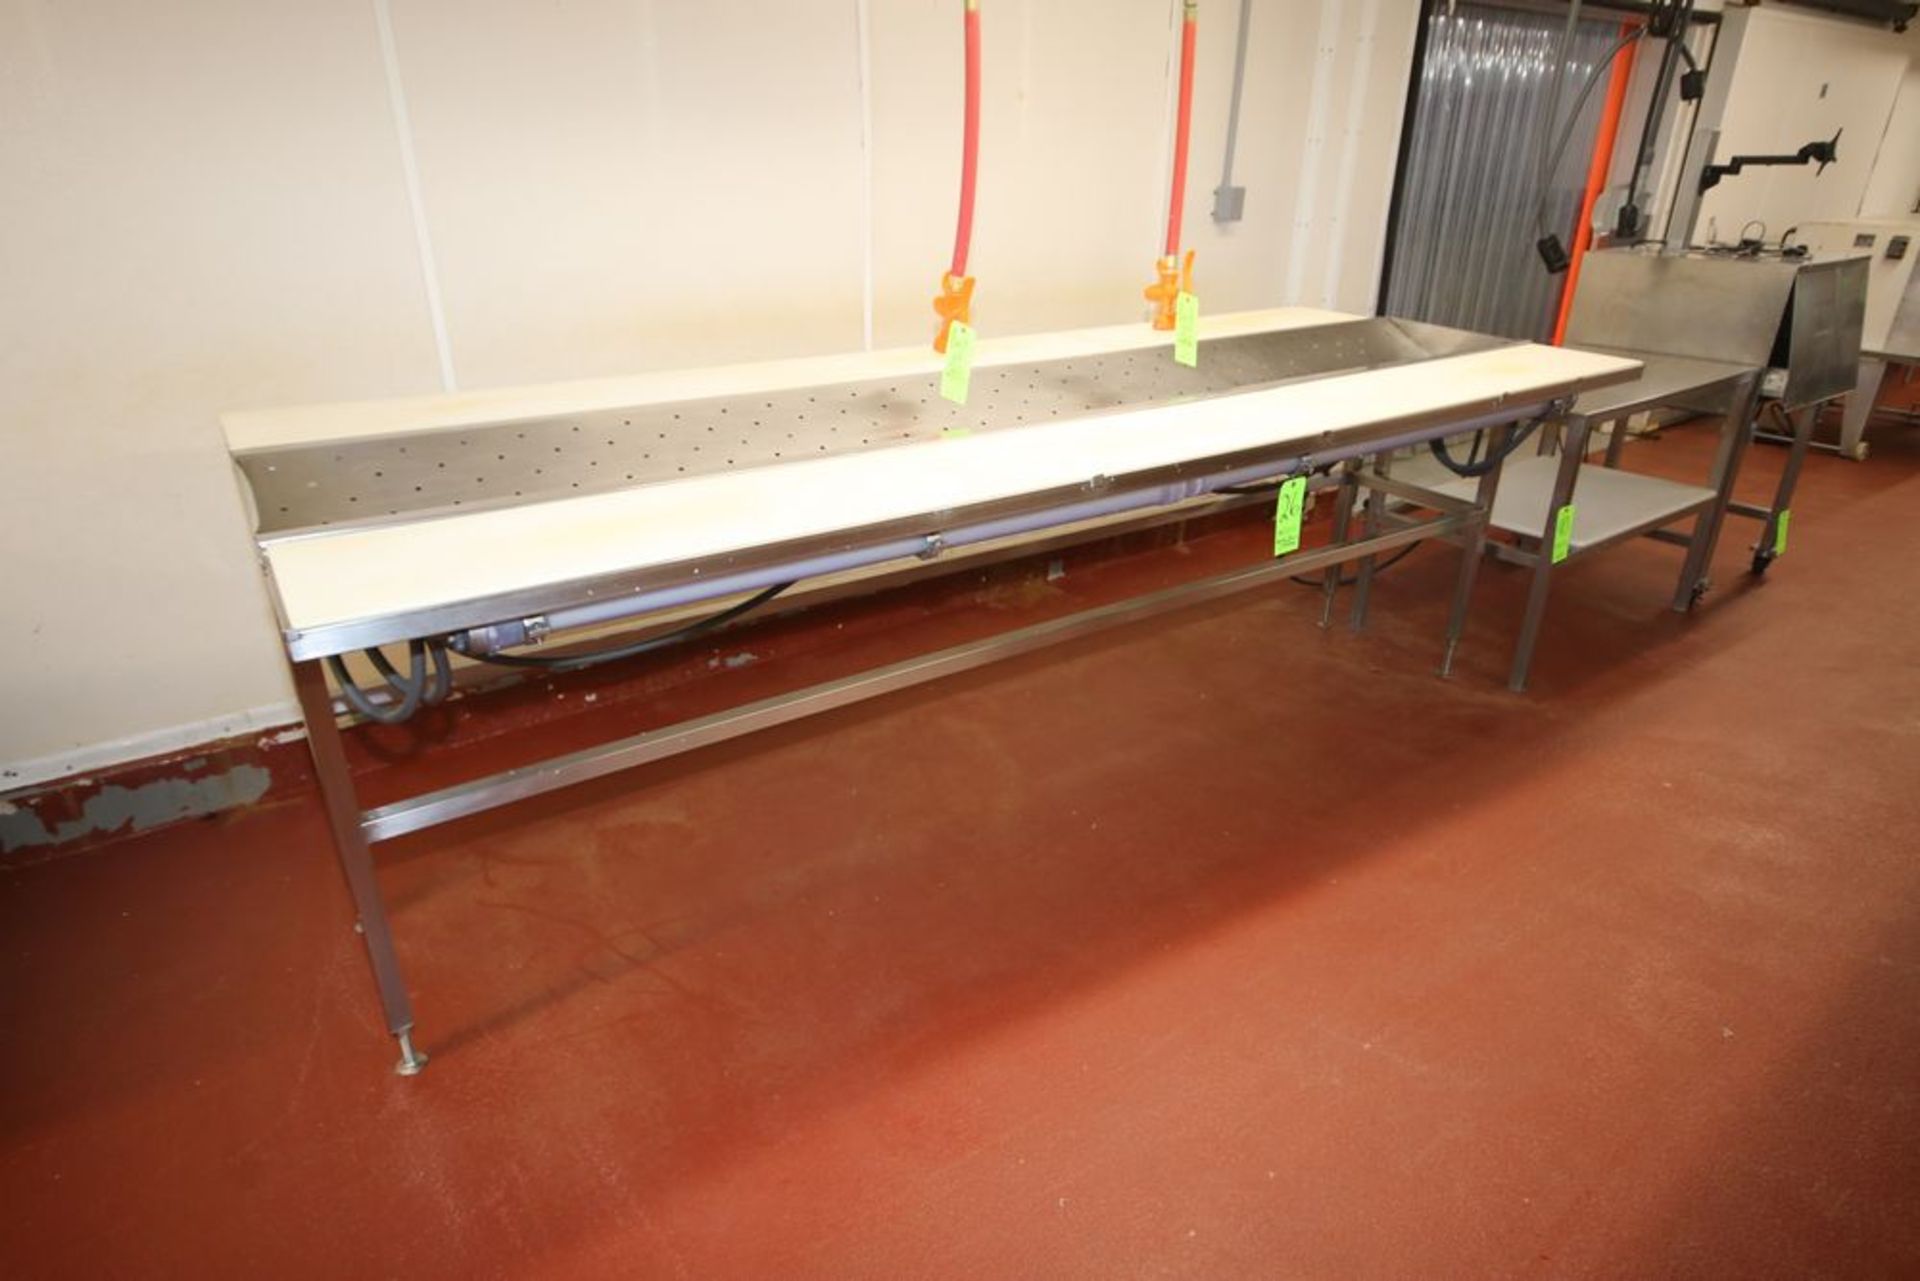 S/S Spray Down Station, with (2) Aprox. 120" L x 20" W Cutting Areas, with Cutting Board Style Table